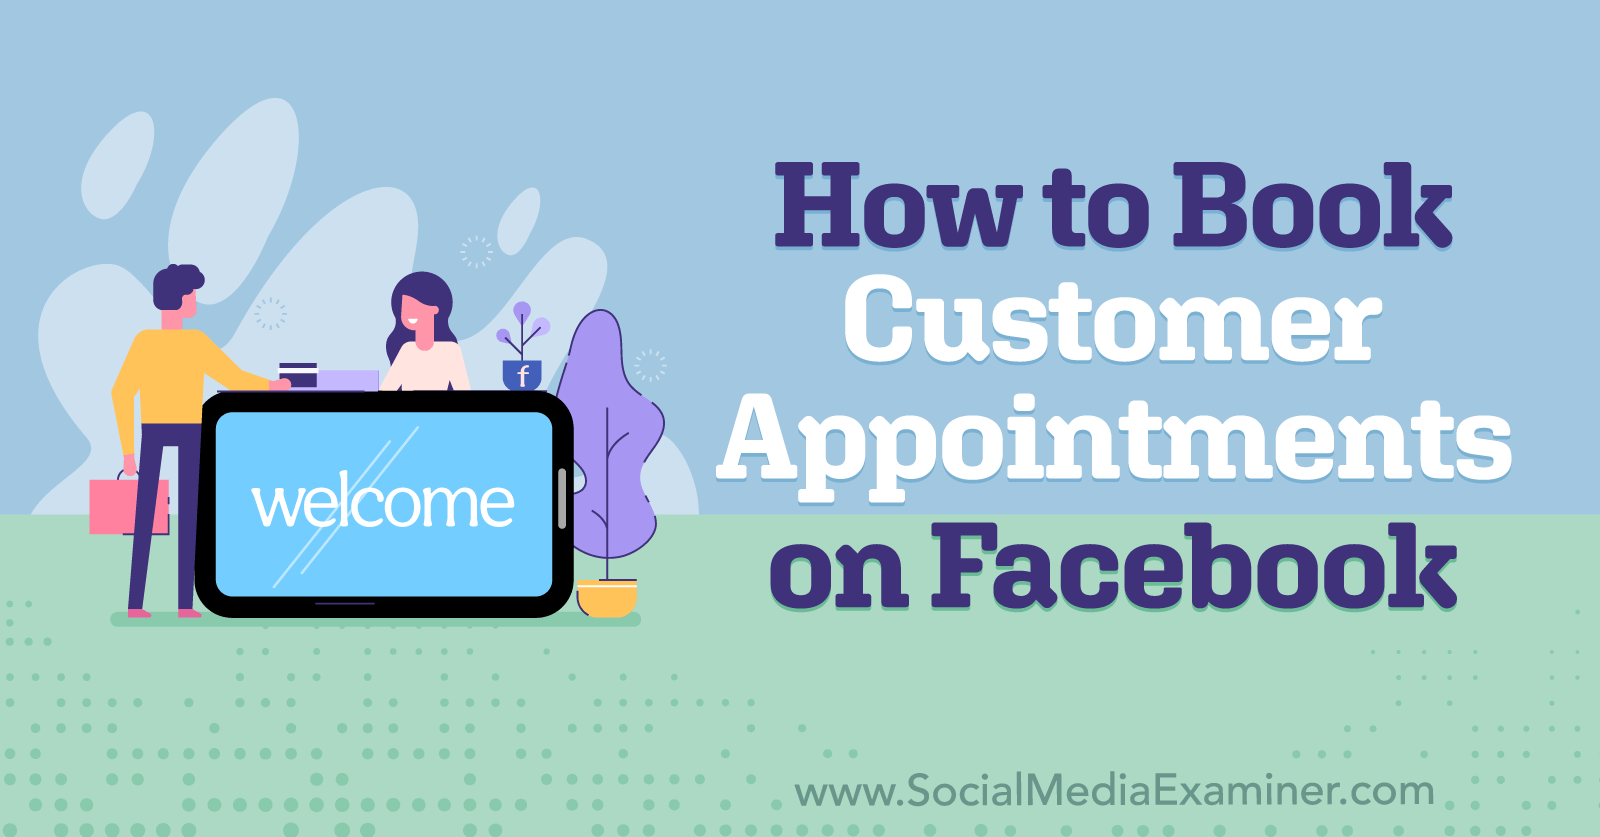 How to Book Customer Appointments on Facebook Social Media Examiner